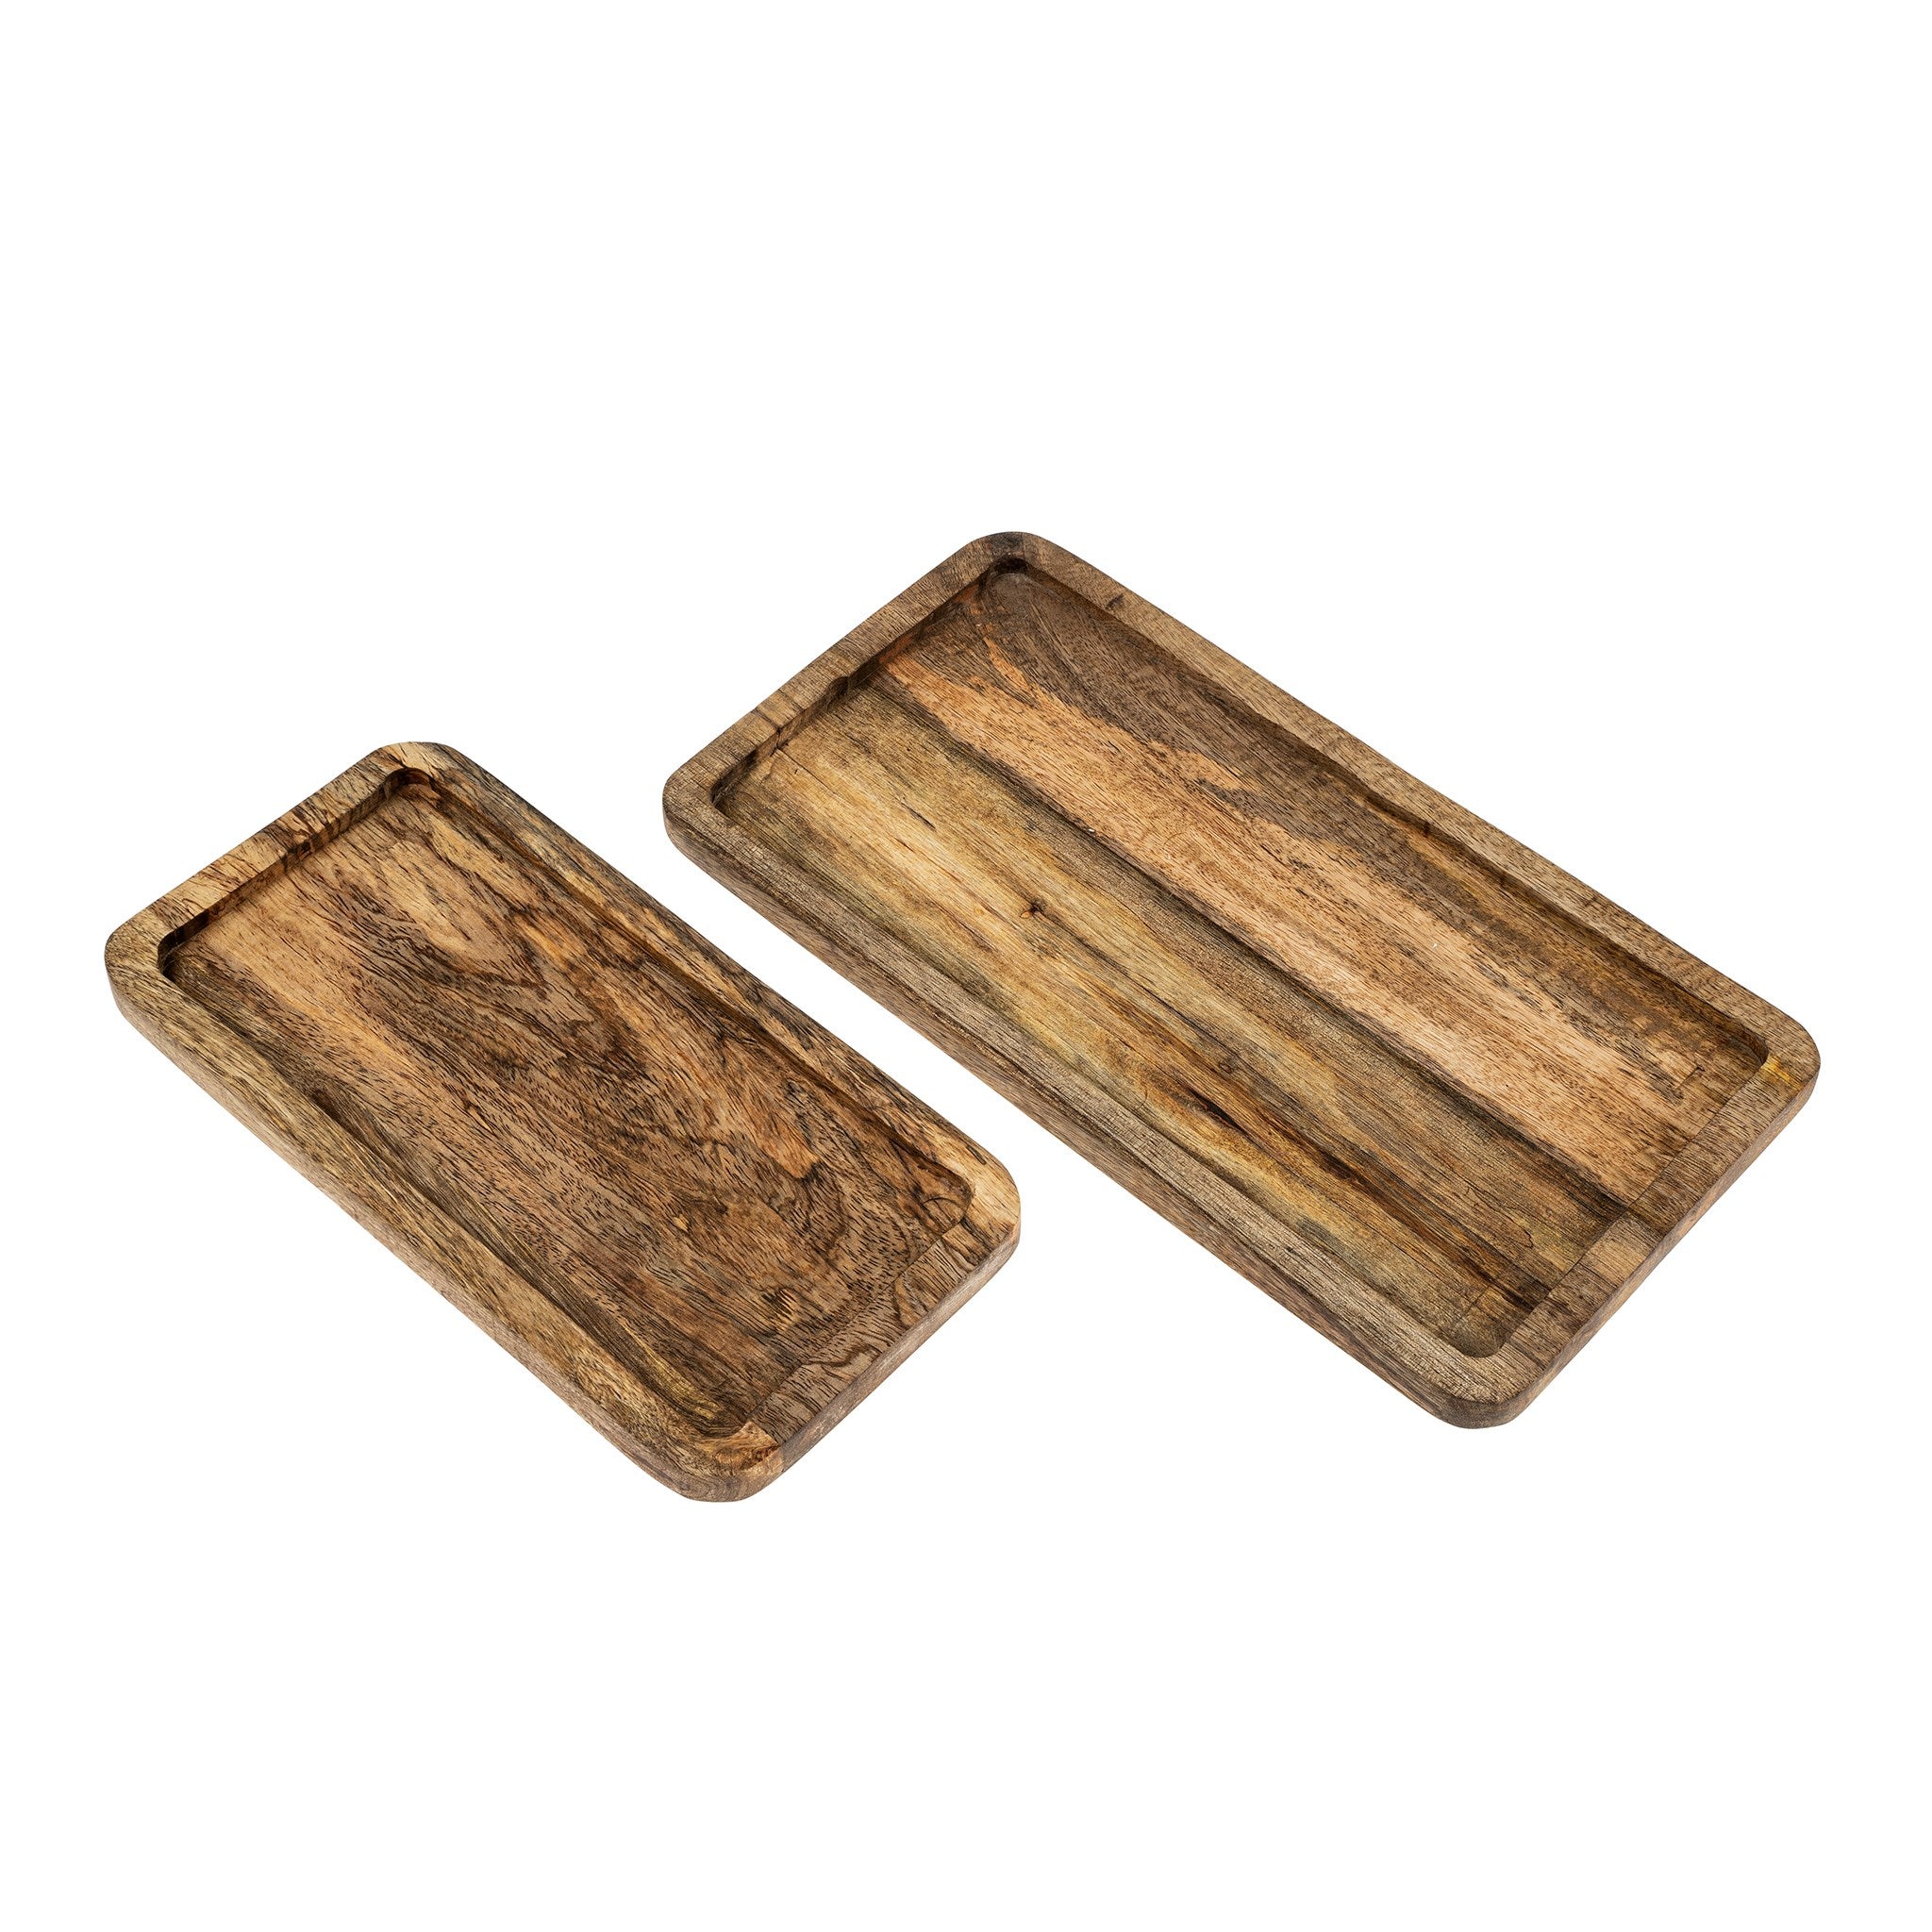 Wooden Tray (Set of 2)